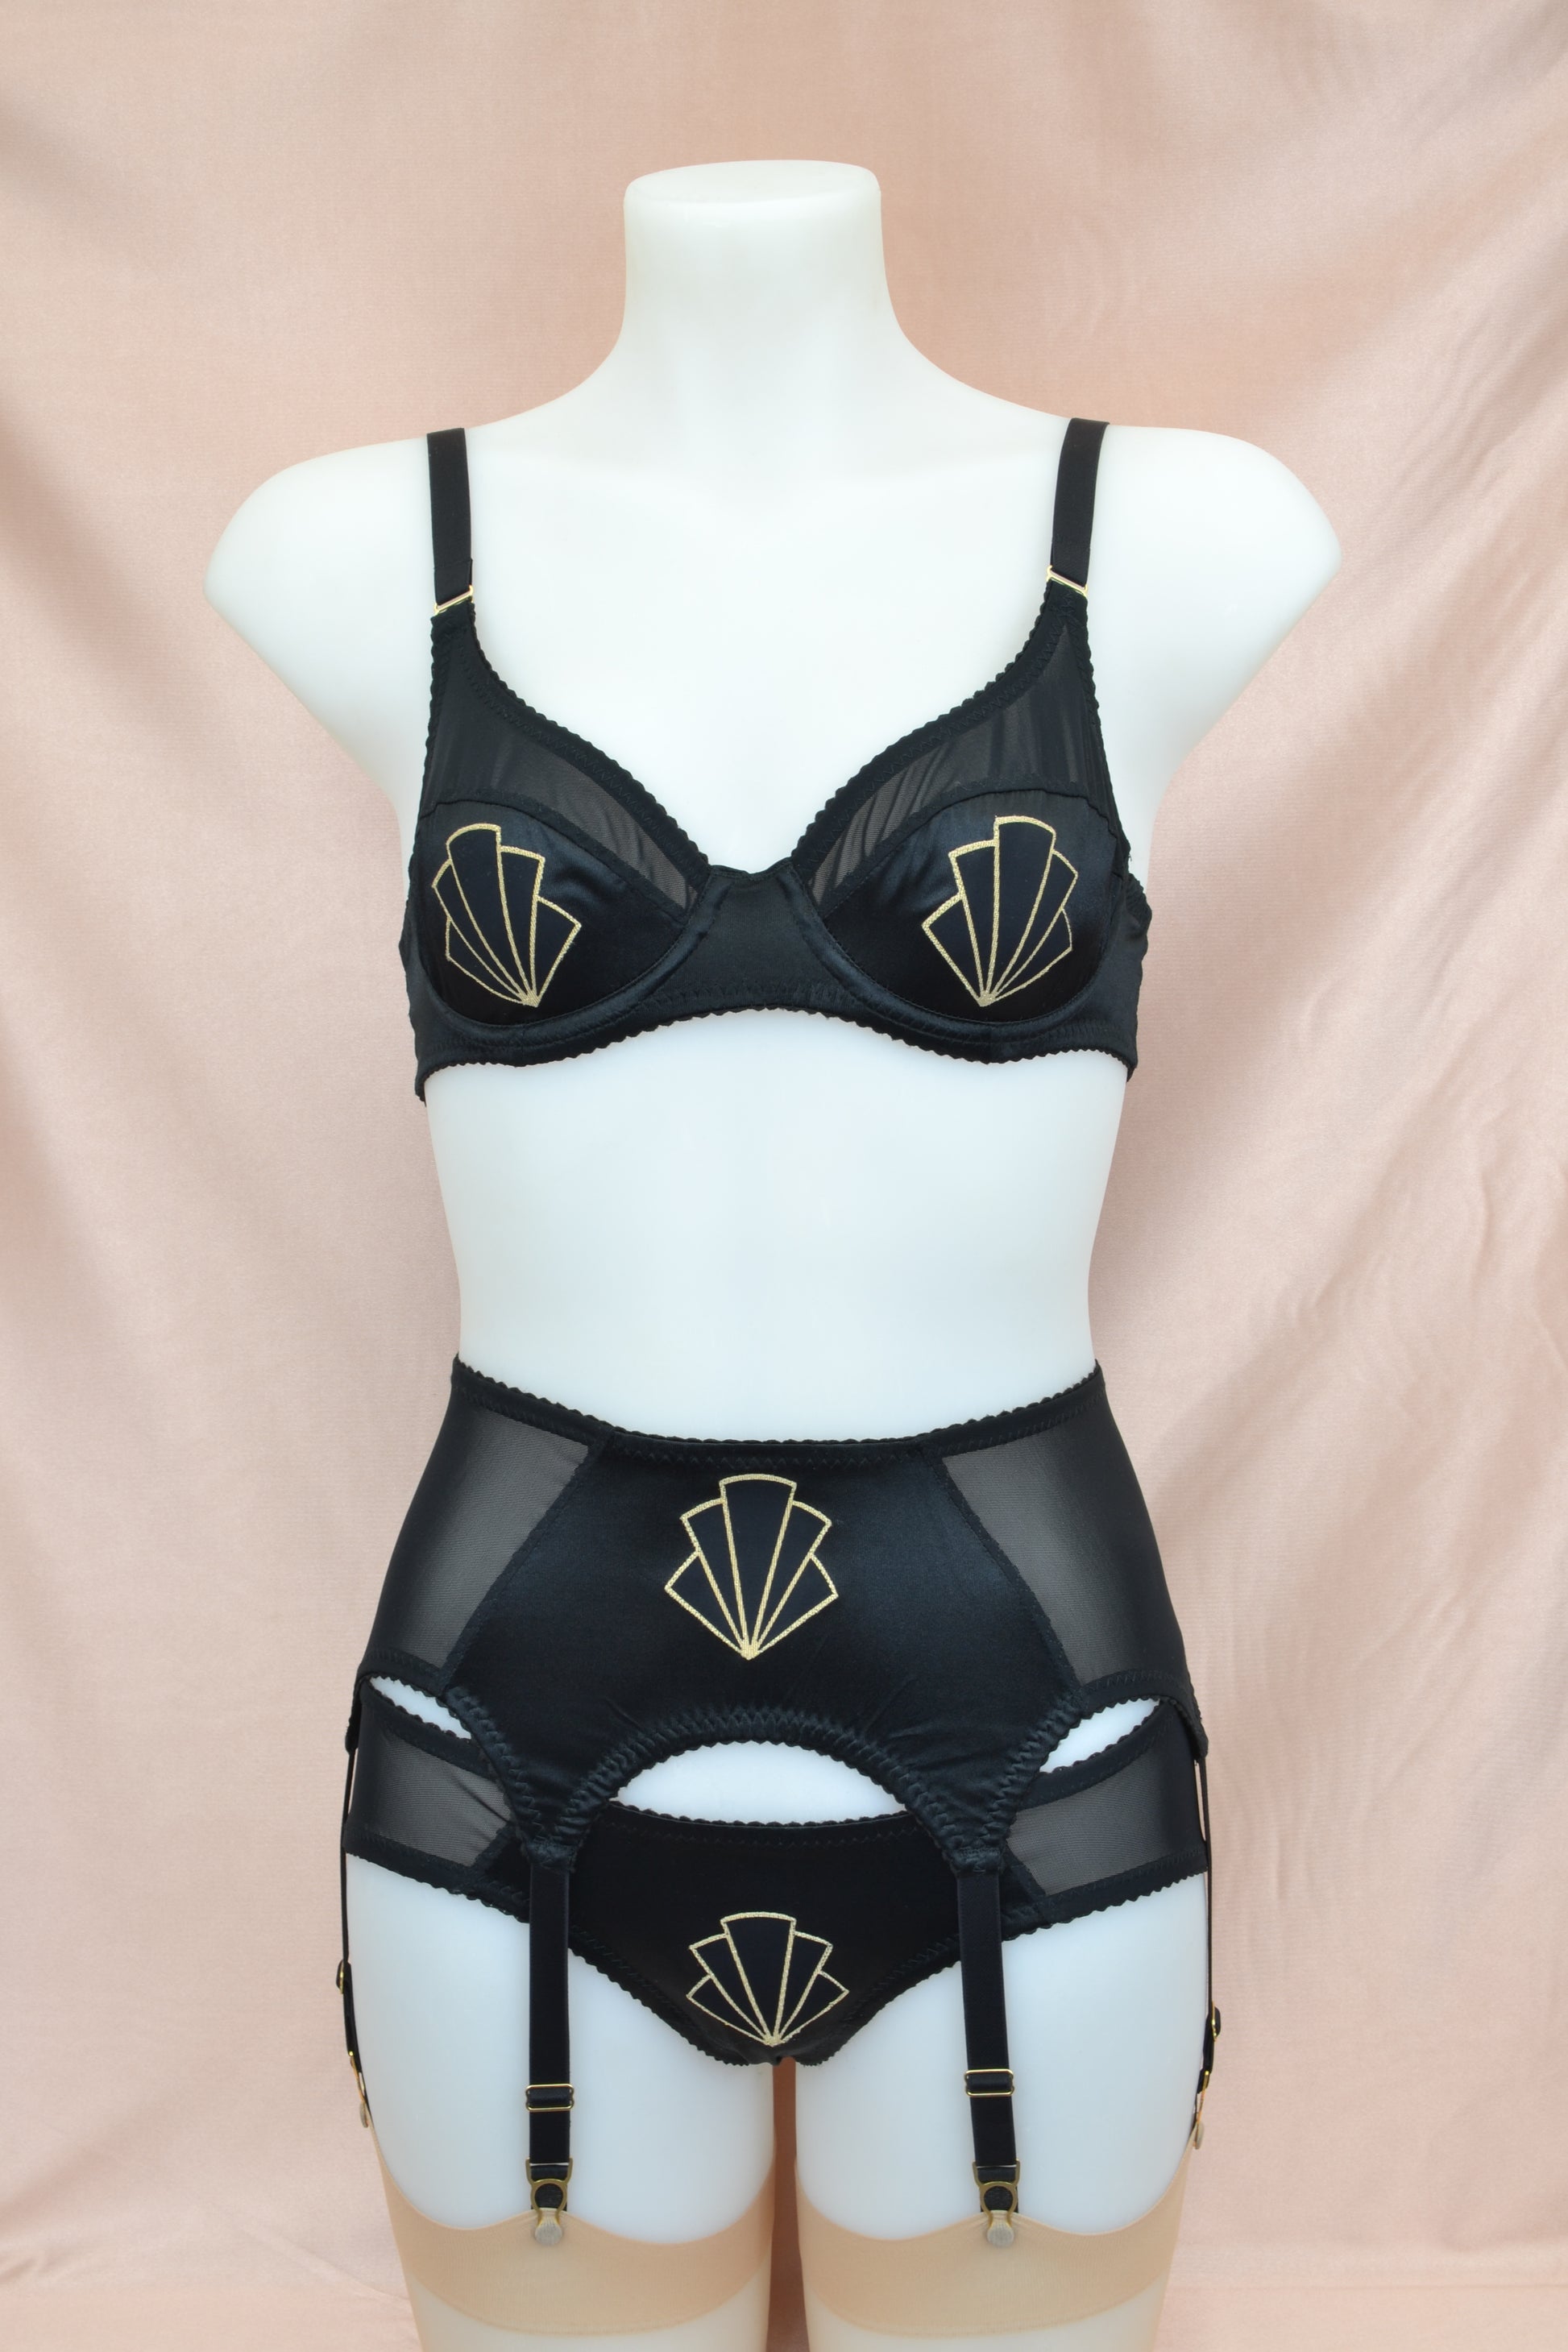 1920s inspired lingerie with art deco style black and gold motif. 1930s vintage style underwear, perfect for great Gatsby themes events. Art deco underwired bra with retro motif, six strap suspender belt and classic cut pantie knicker. Gold hardwear and garter clips. Burlesque lingerie and underwear made in the UK.